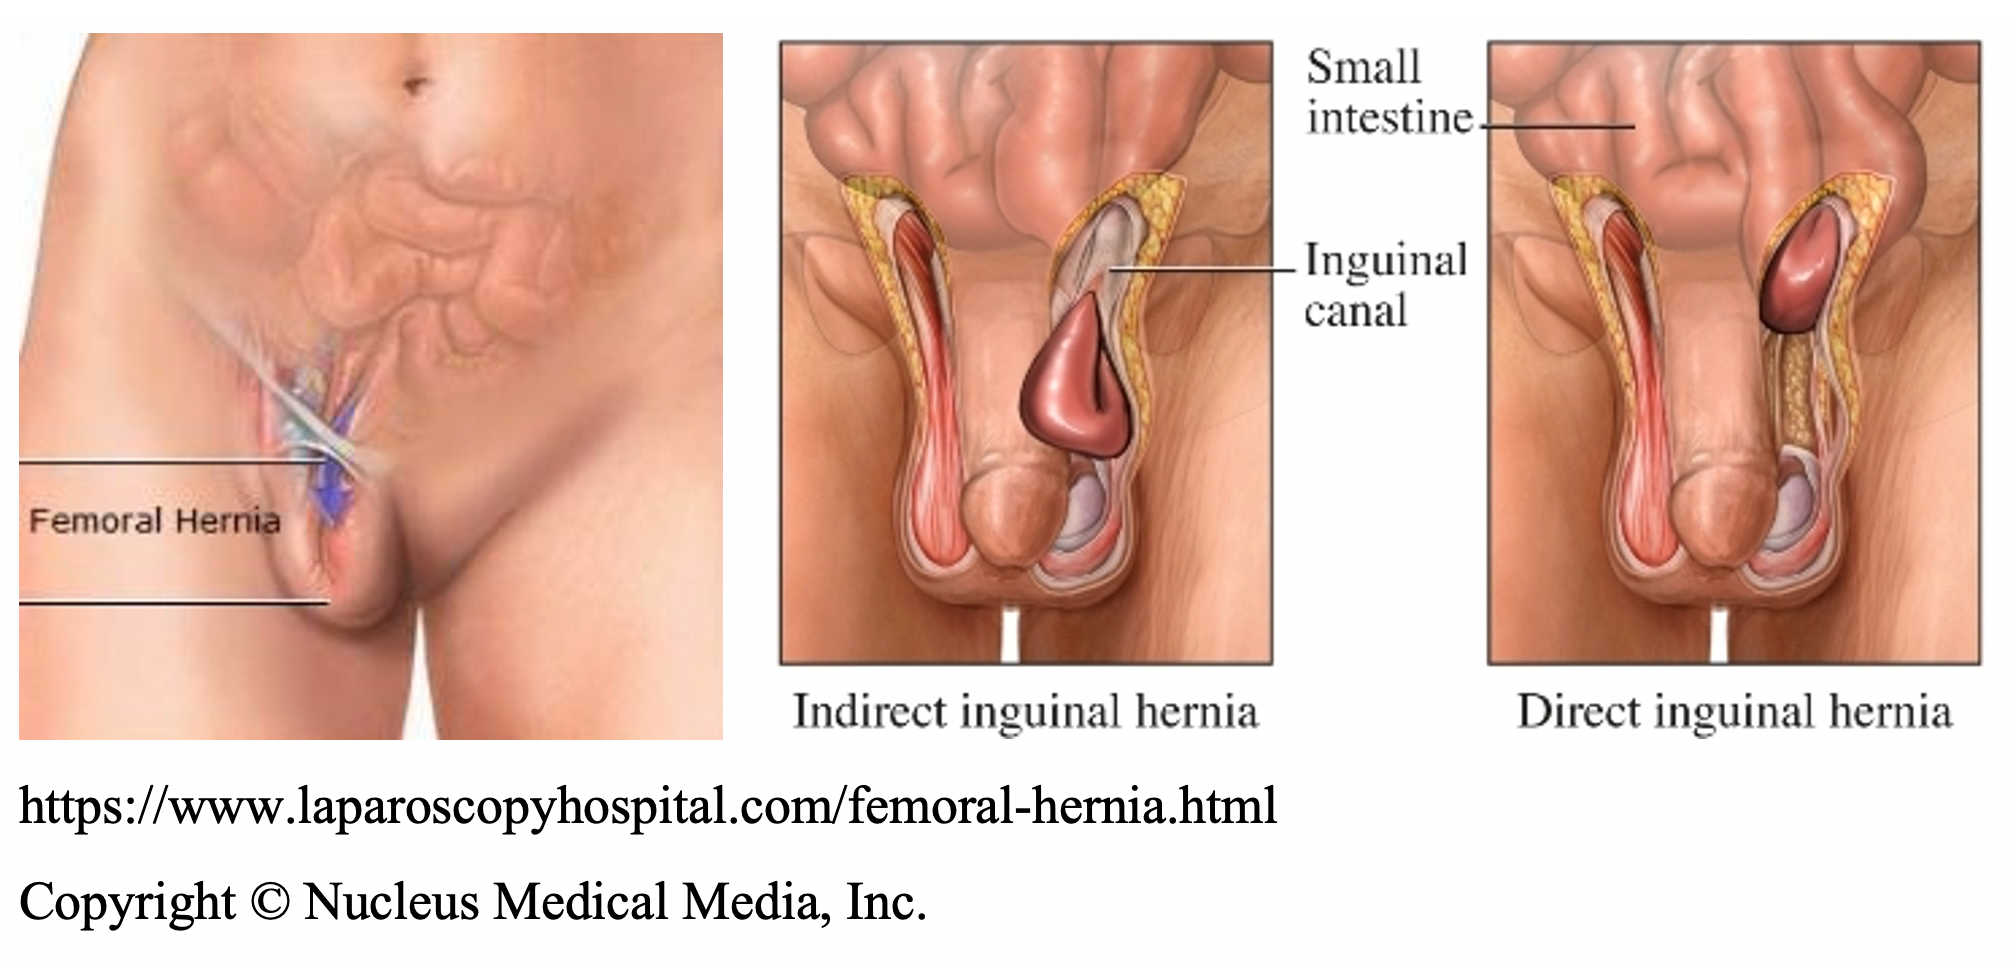 Understanding the Differences Between Femoral Hernia vs Inguinal Hernia